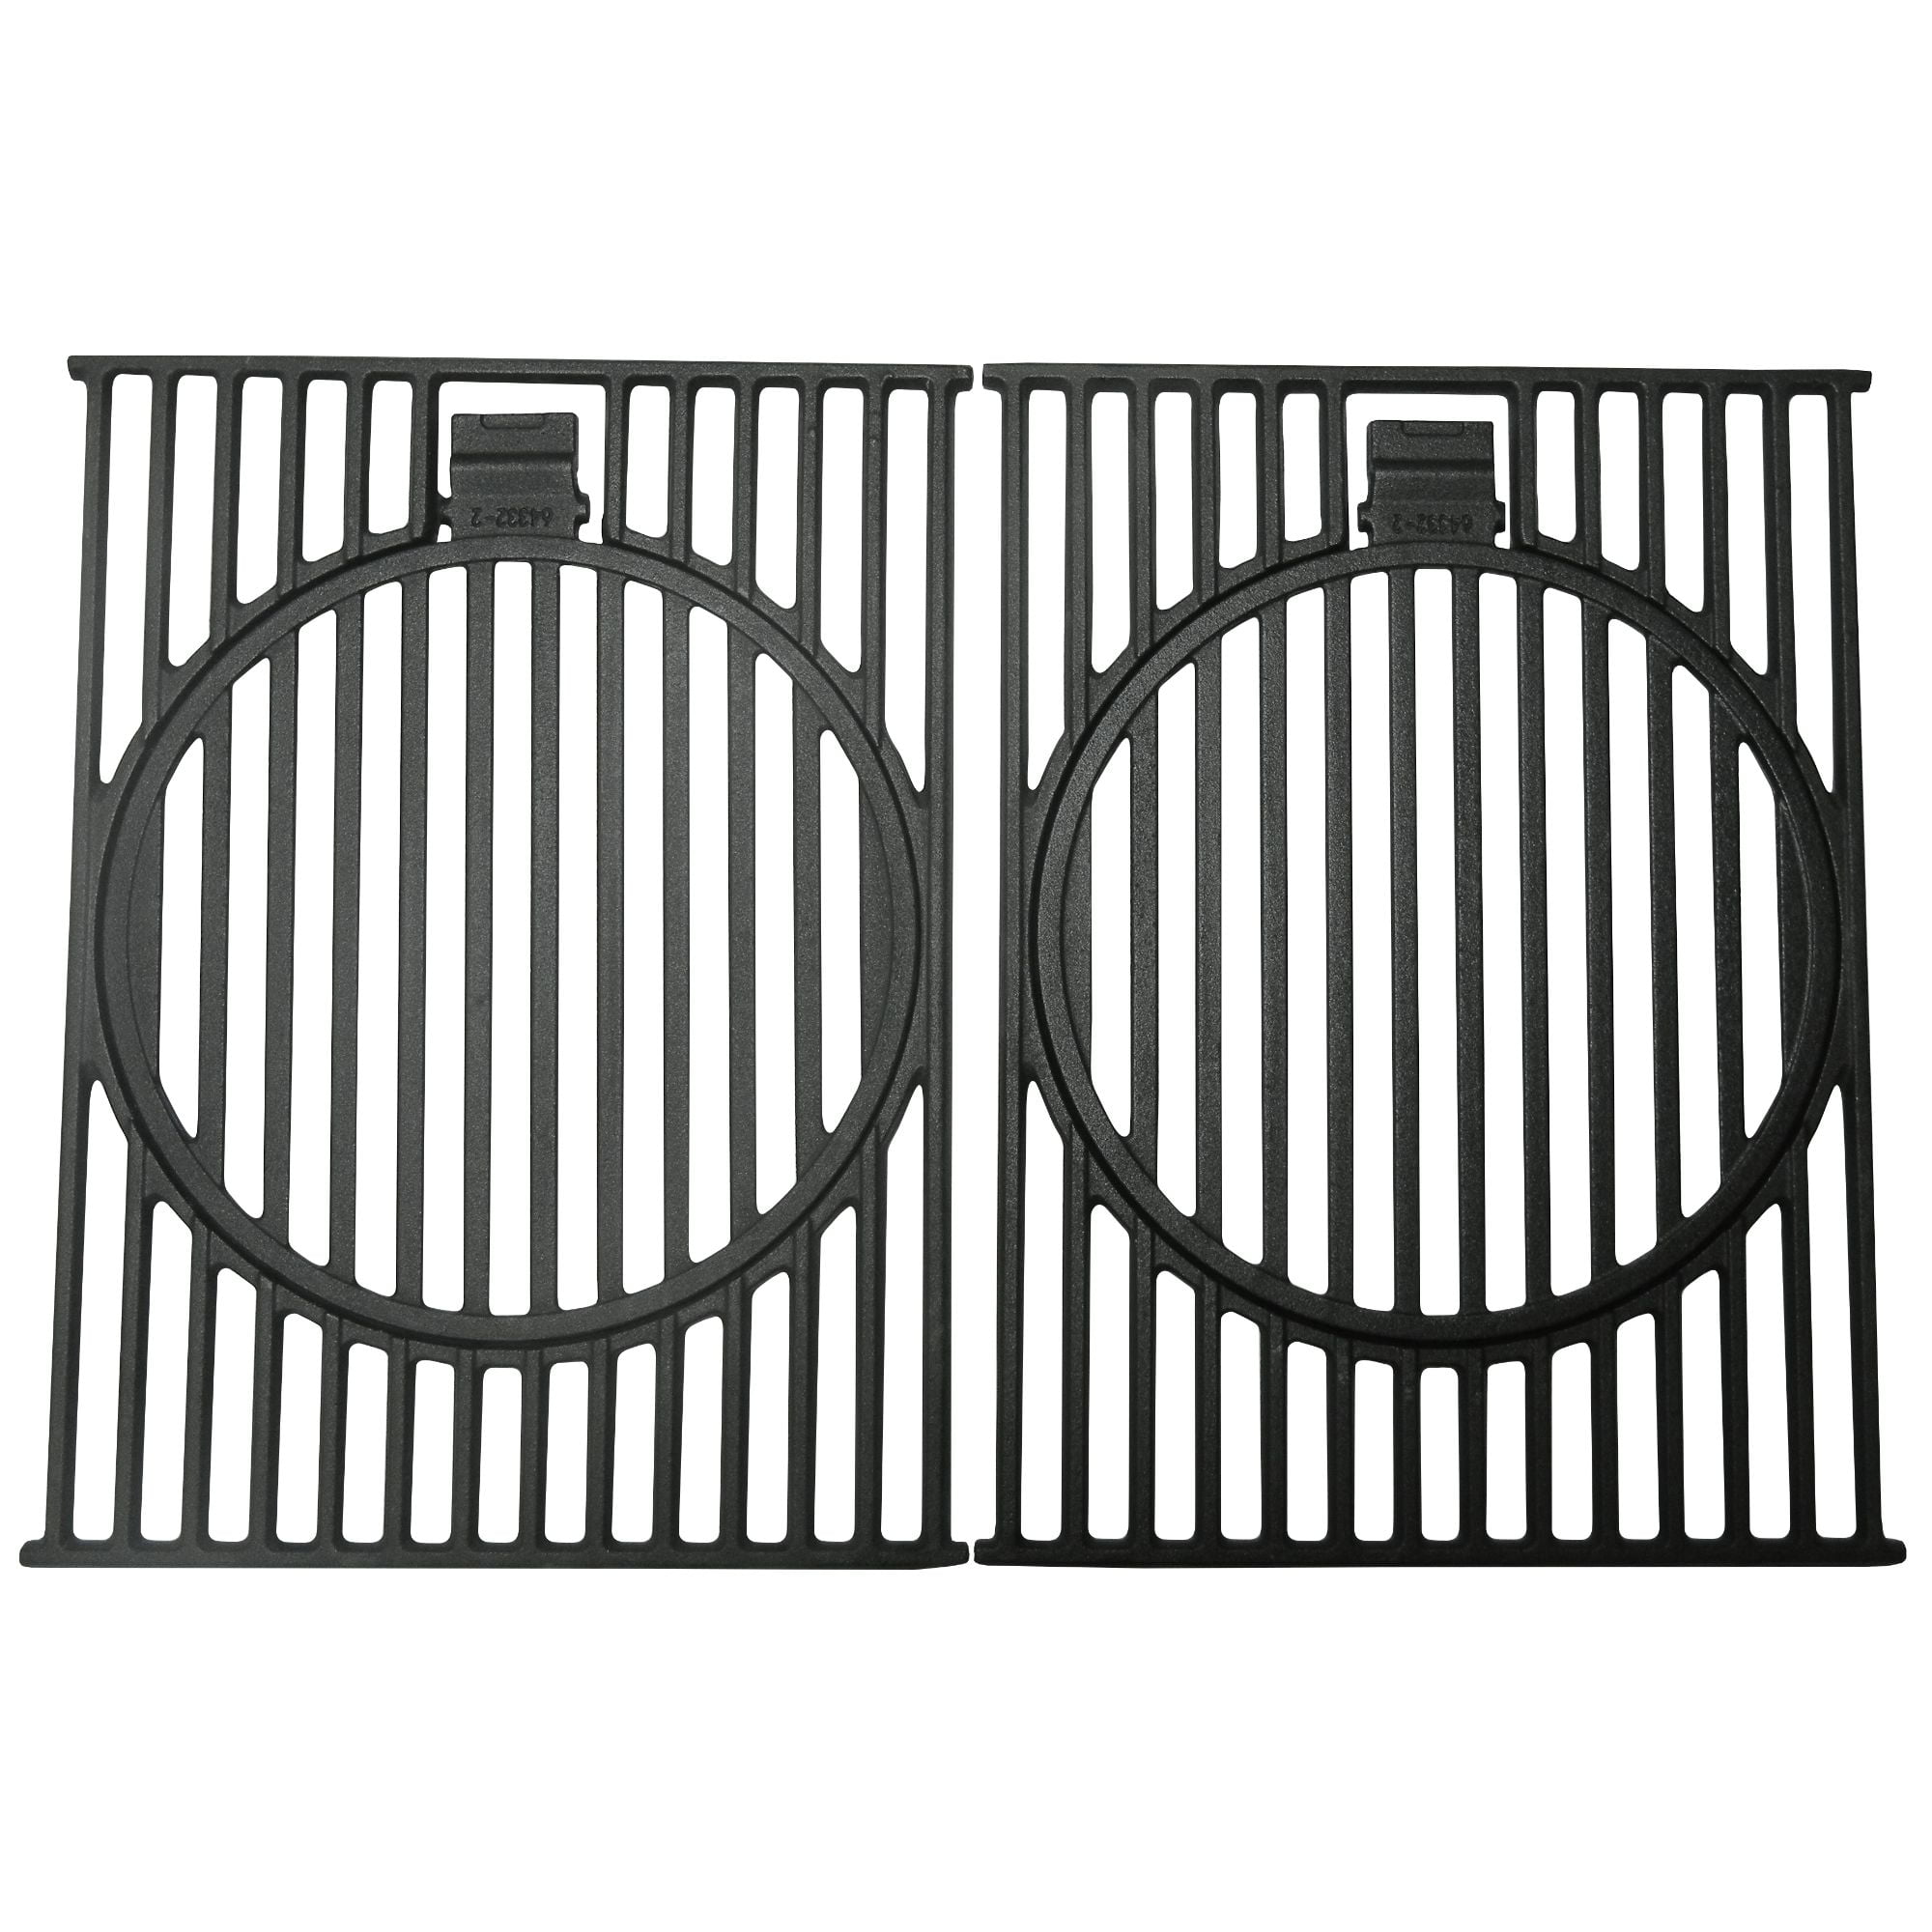 Matte cast iron cooking grid for Stok brand gas grills